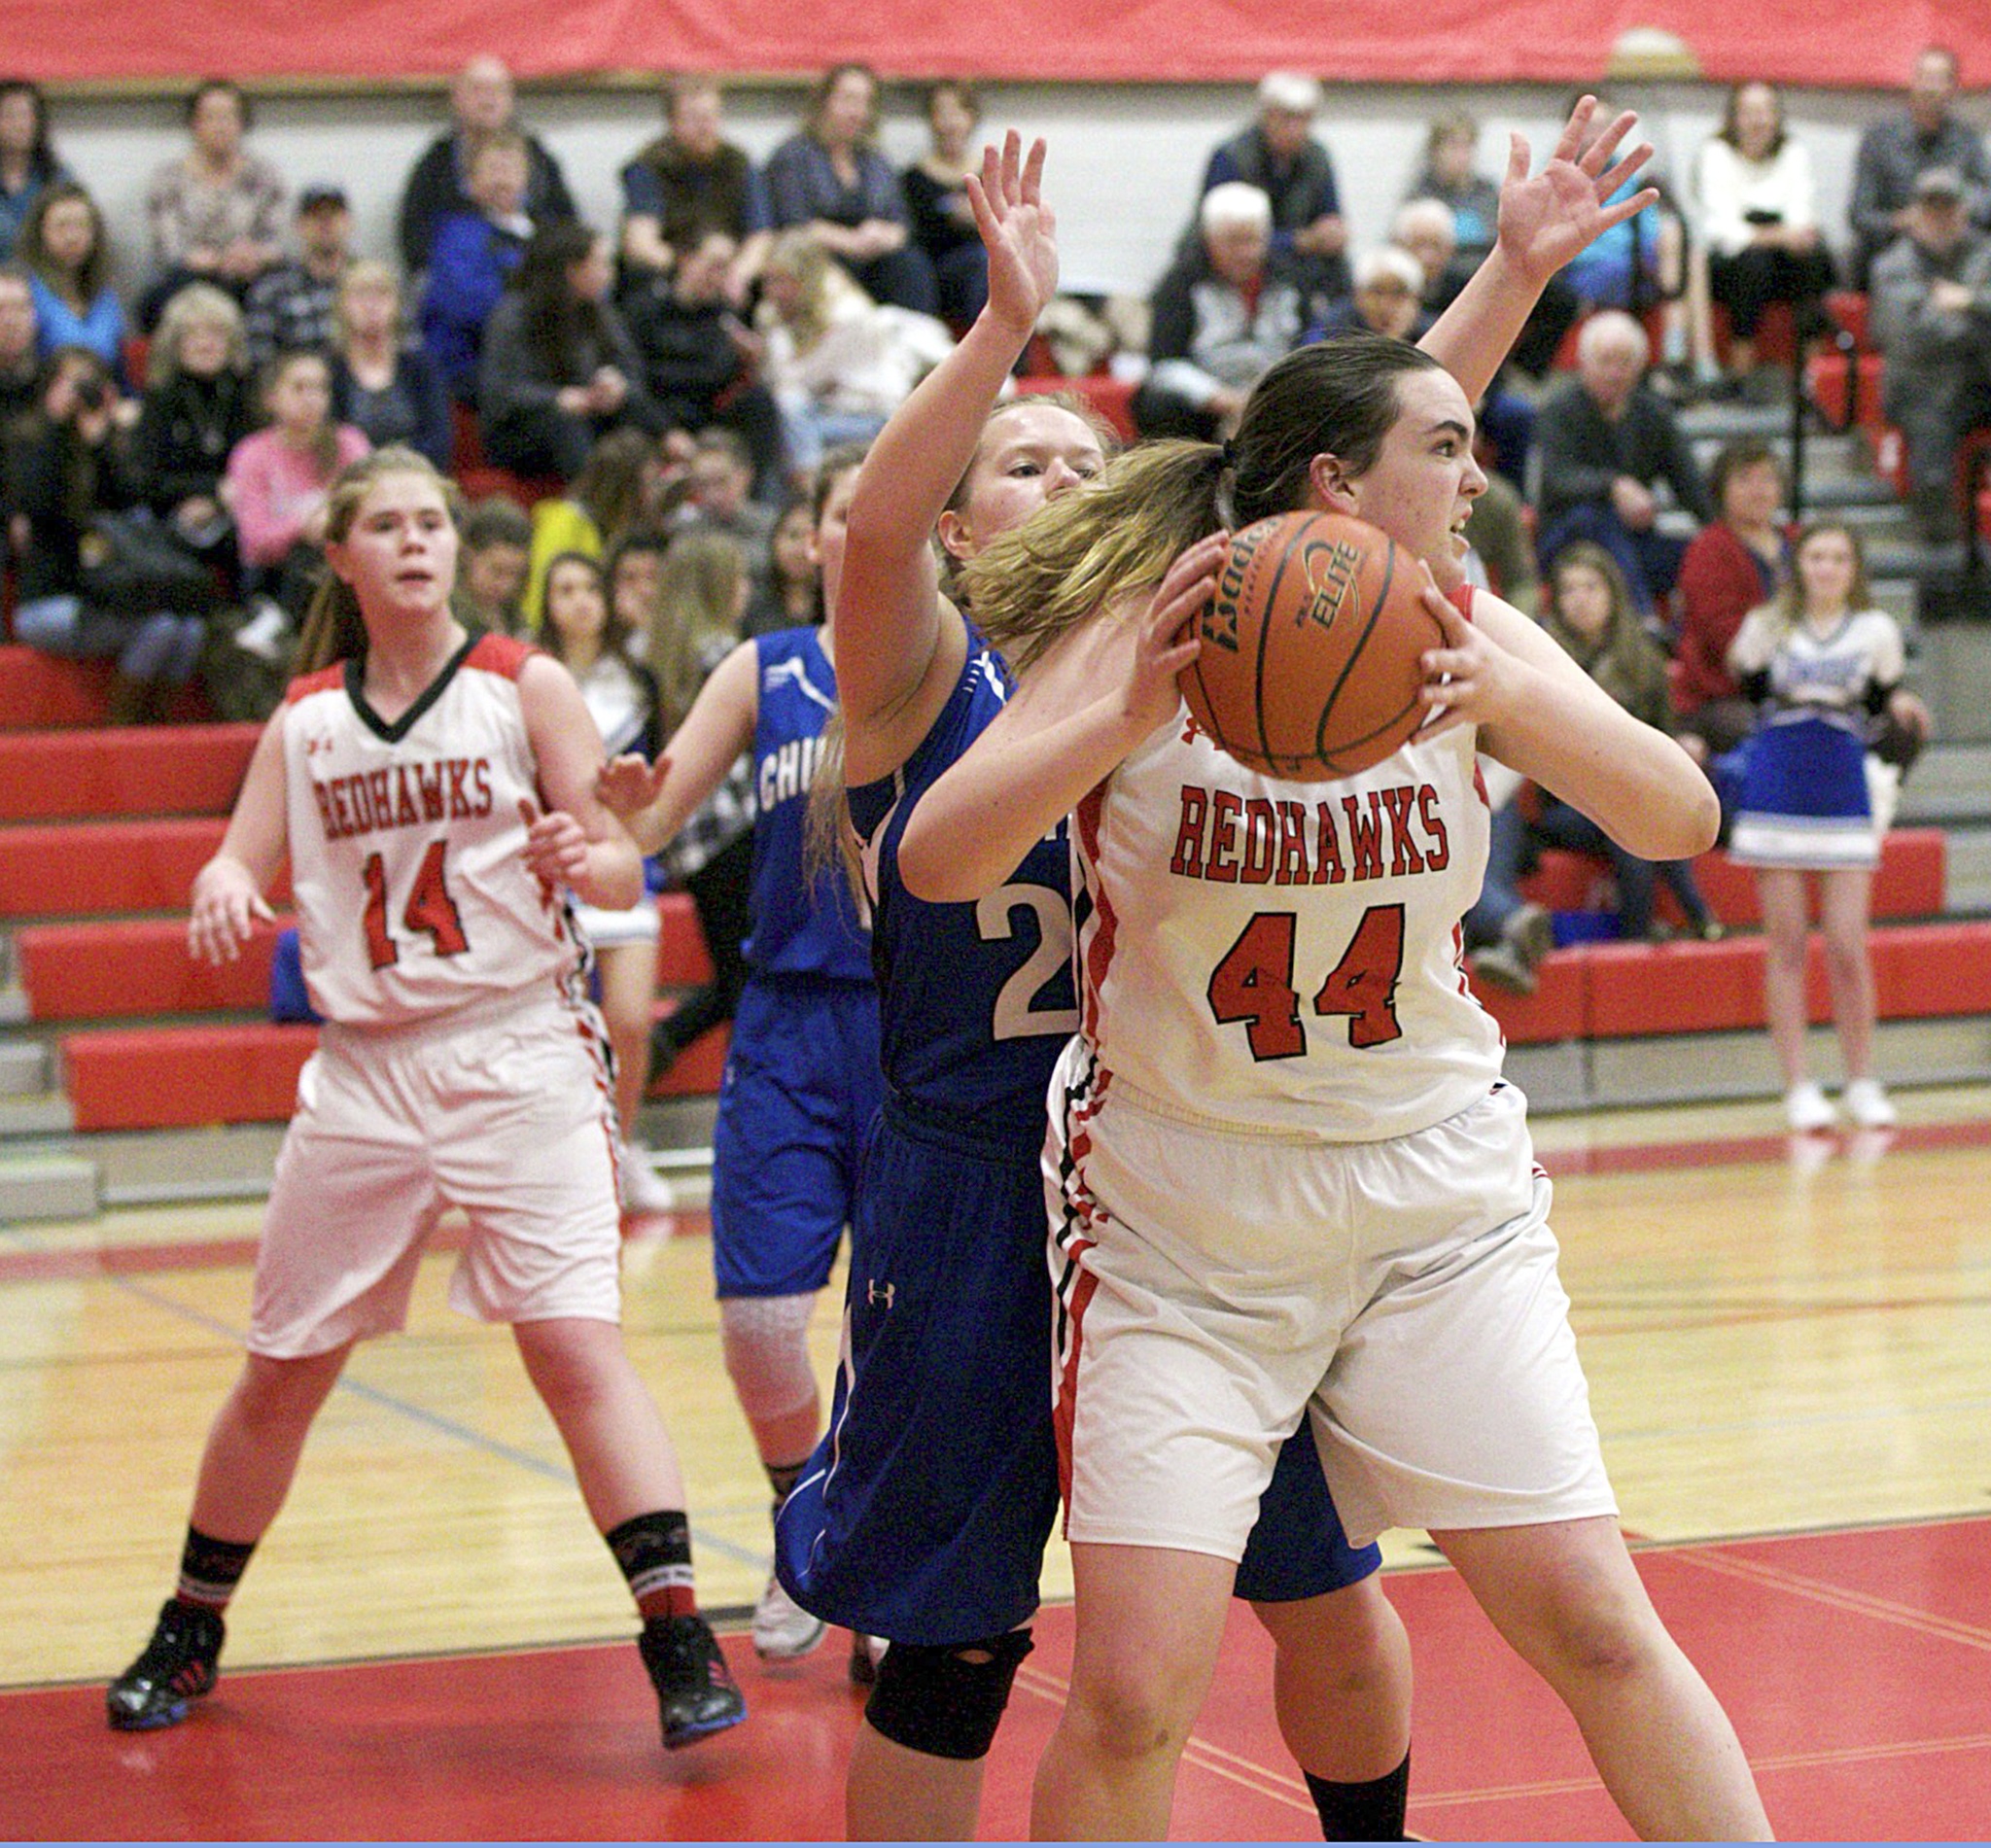 Steve Mullensky/for Peninsula Daily News                                PortTownsend’s Izzy Hammett looks for someone to pass the ball to while being guarded by Chimacum’s Shanya Nisbet during the Cowboys’ 42-28 win over the rival Redhawks.